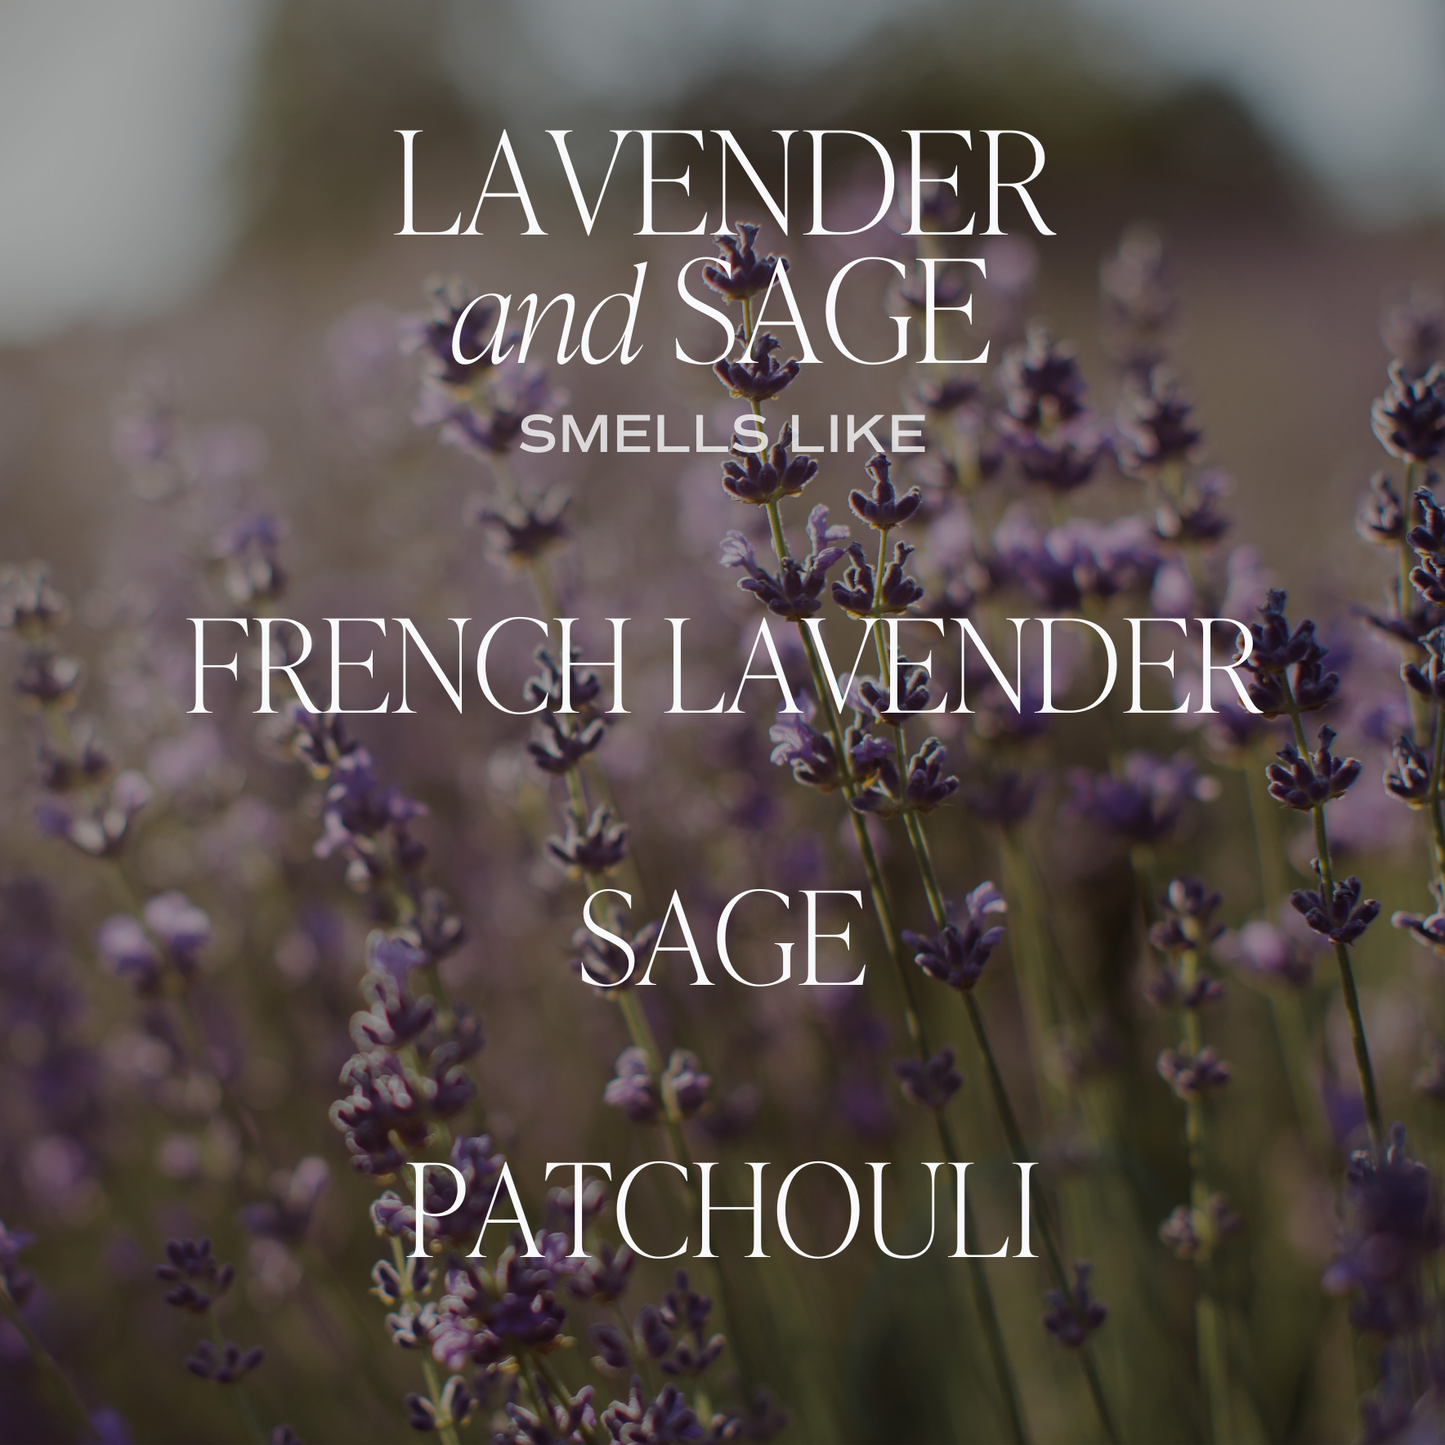 Lavender and Sage Candle